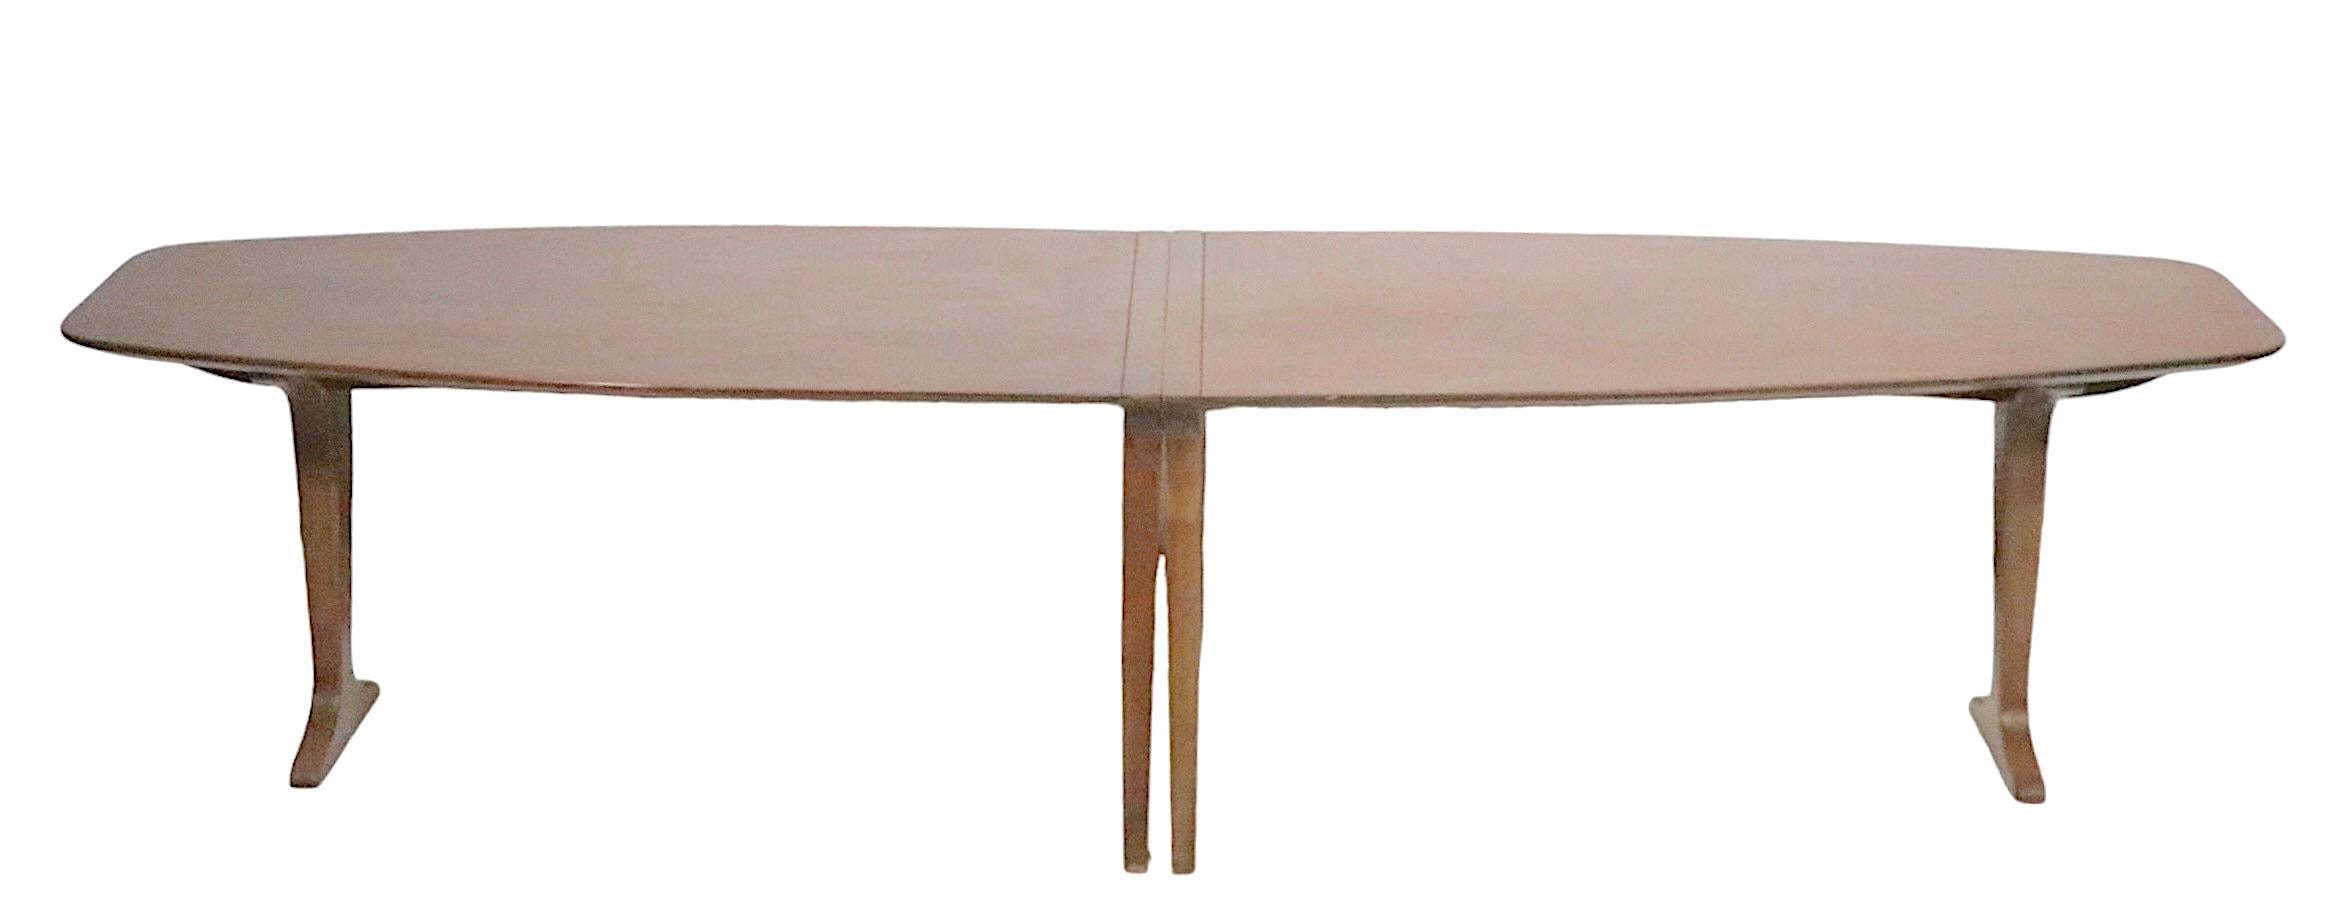 2 pc. Mid Century Surfboard Coffee Table by John Van Koert for Drexel c. 1960’s  In Good Condition For Sale In New York, NY